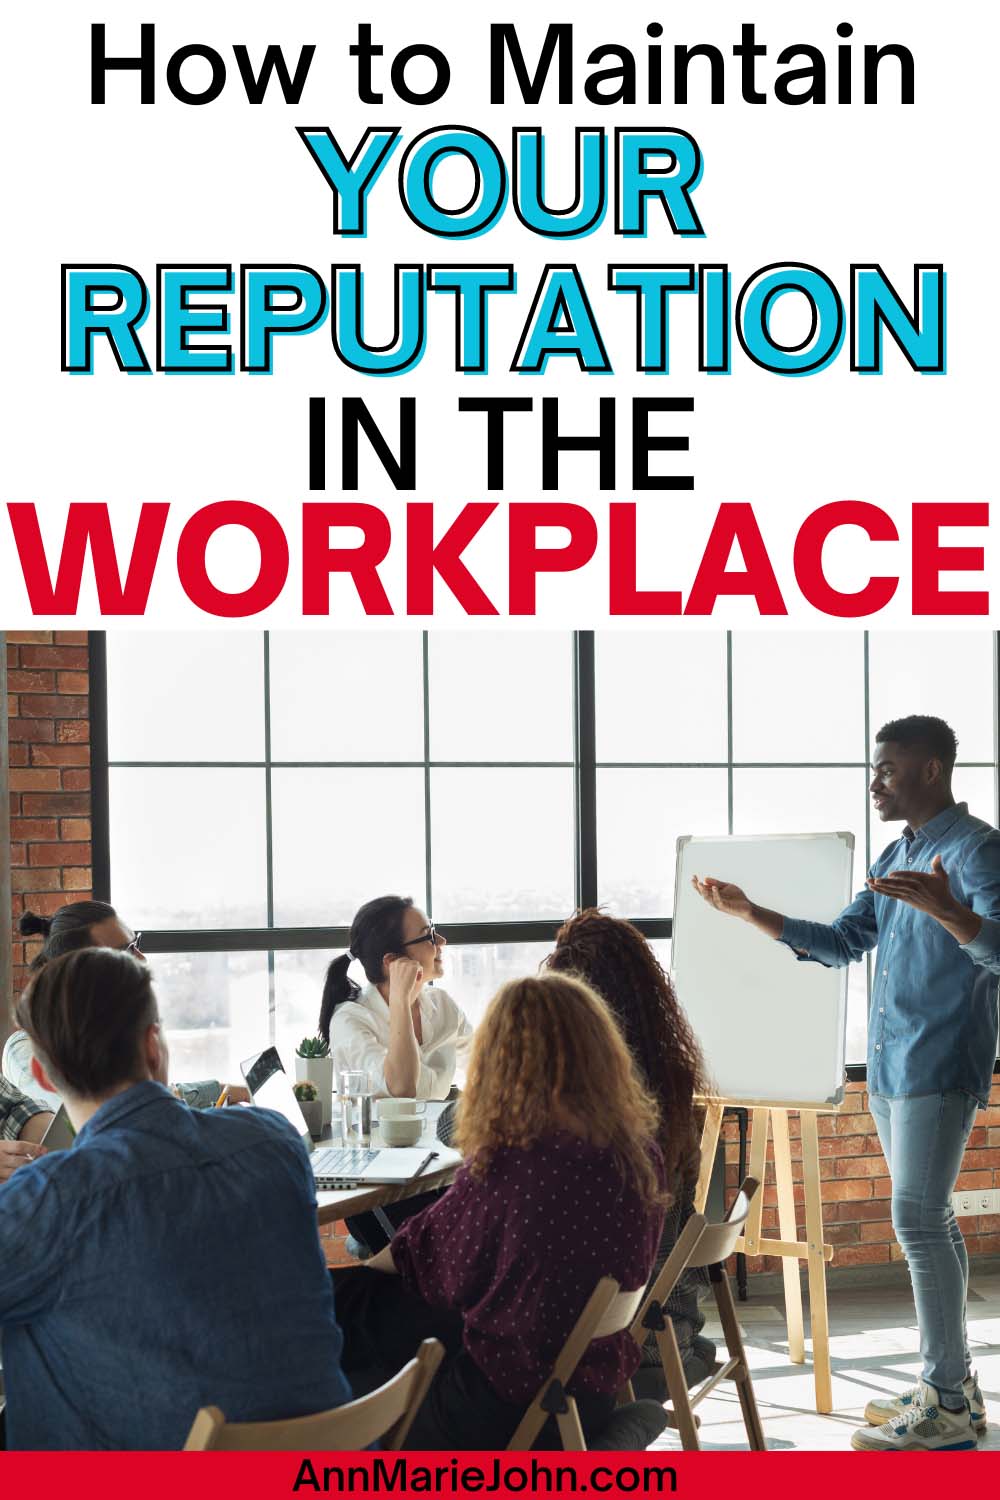 How To Maintain Your Reputation In The Workplace